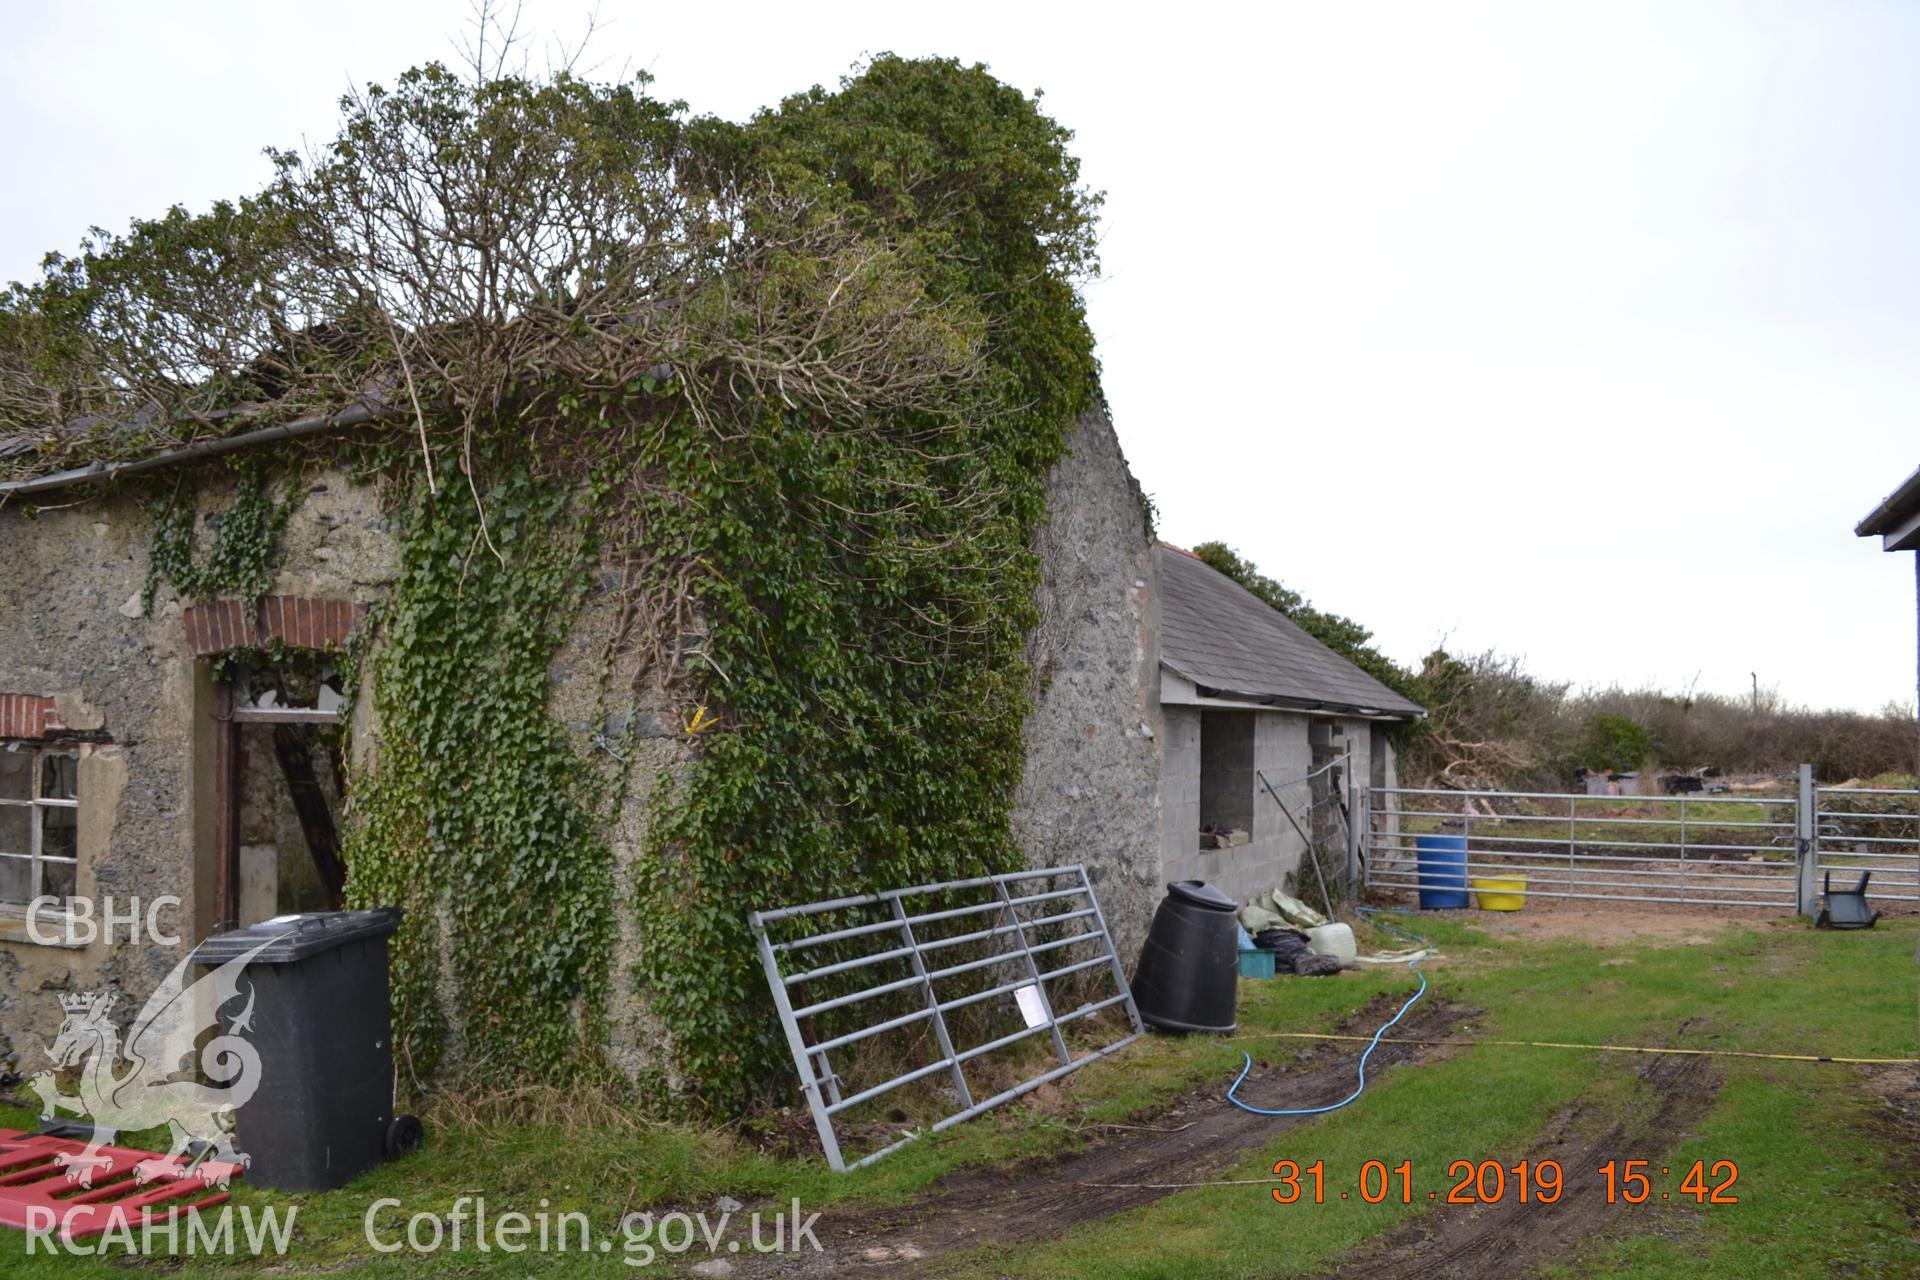 Digital colour photograph showing southern and eastern elevations of the old butcher shop at Fron Deg, Caergeiliog, Ynys Mon. Produced by Gerwyn Williams to meet a condition attached to a planning application, 2019.